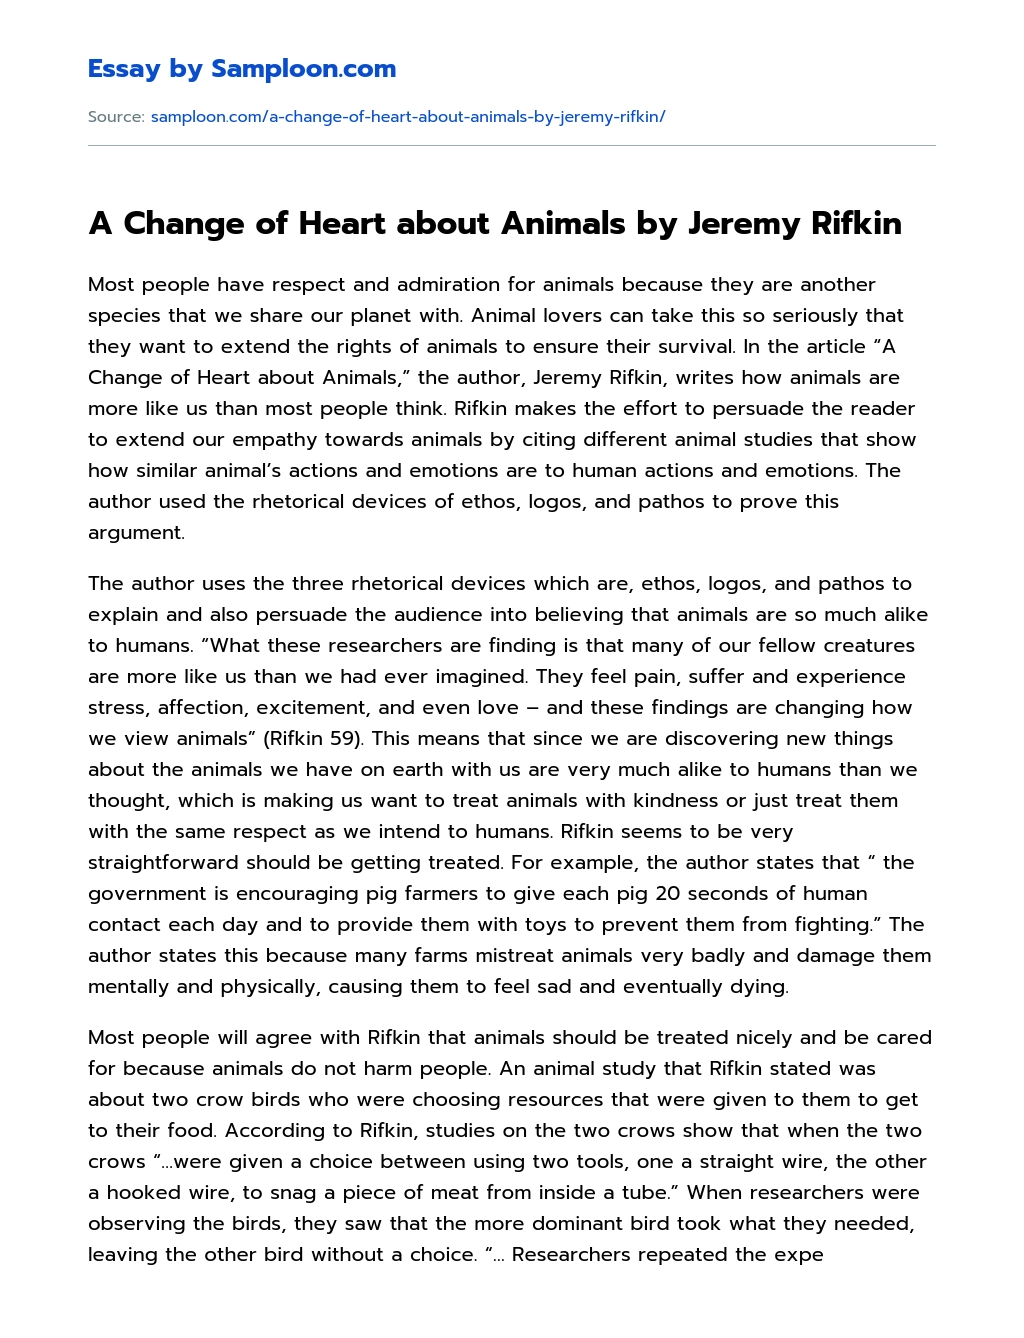 A Change of Heart about Animals by Jeremy Rifkin essay